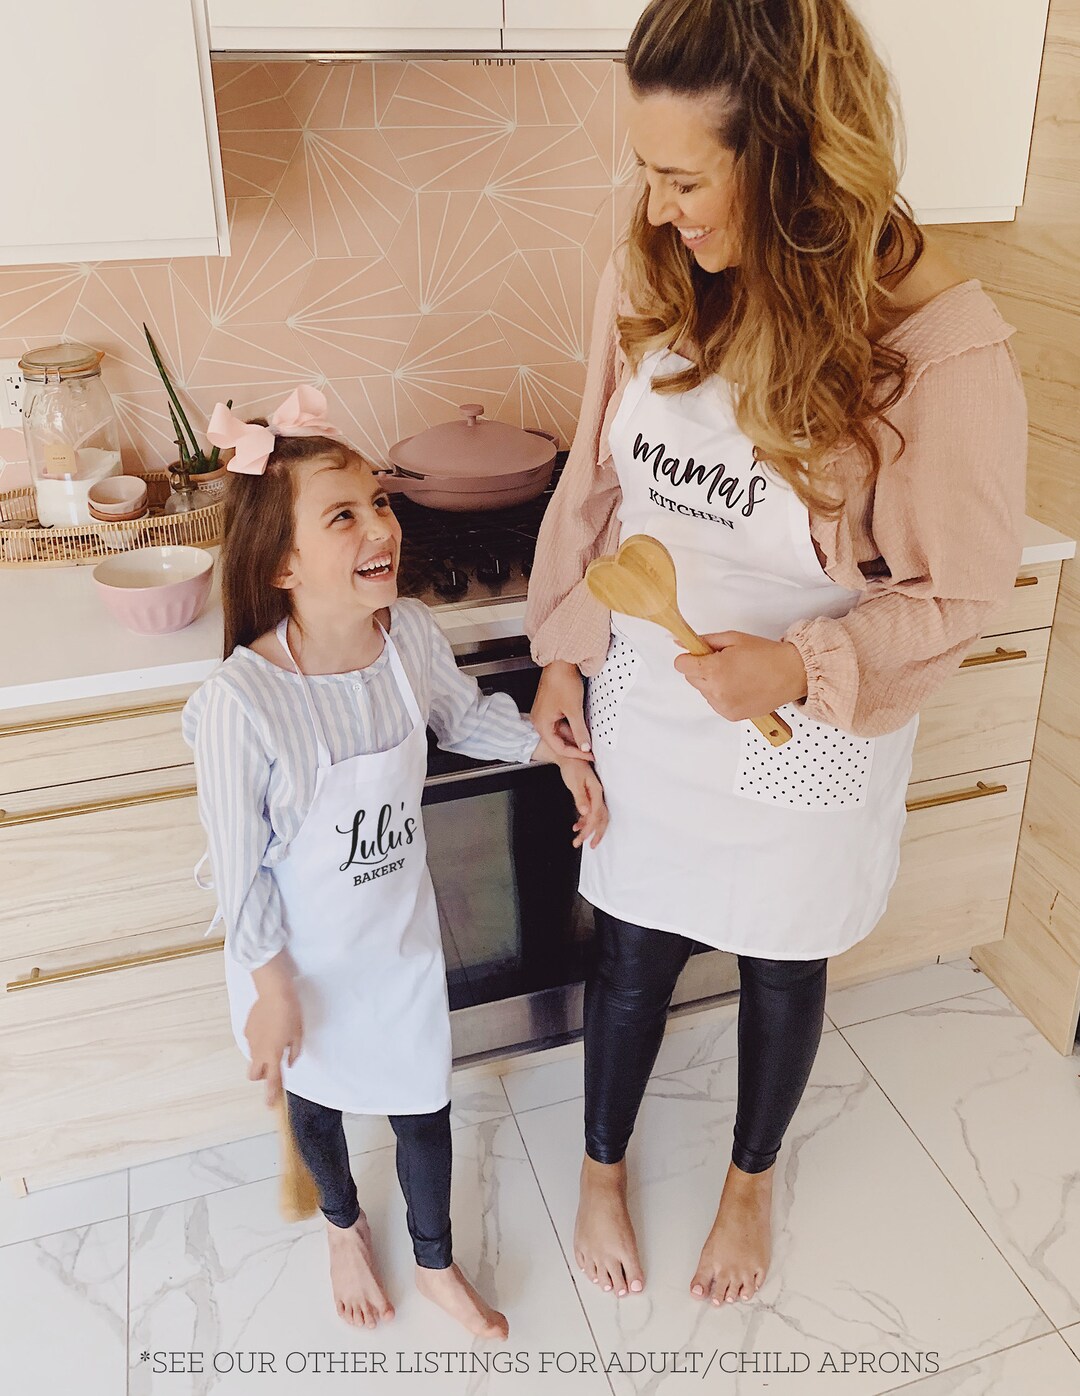 Aprons Mother Daughter Chef Kitchen Adult and Kid Cooking Baking Mommy and  Me (Size 3-7 years)